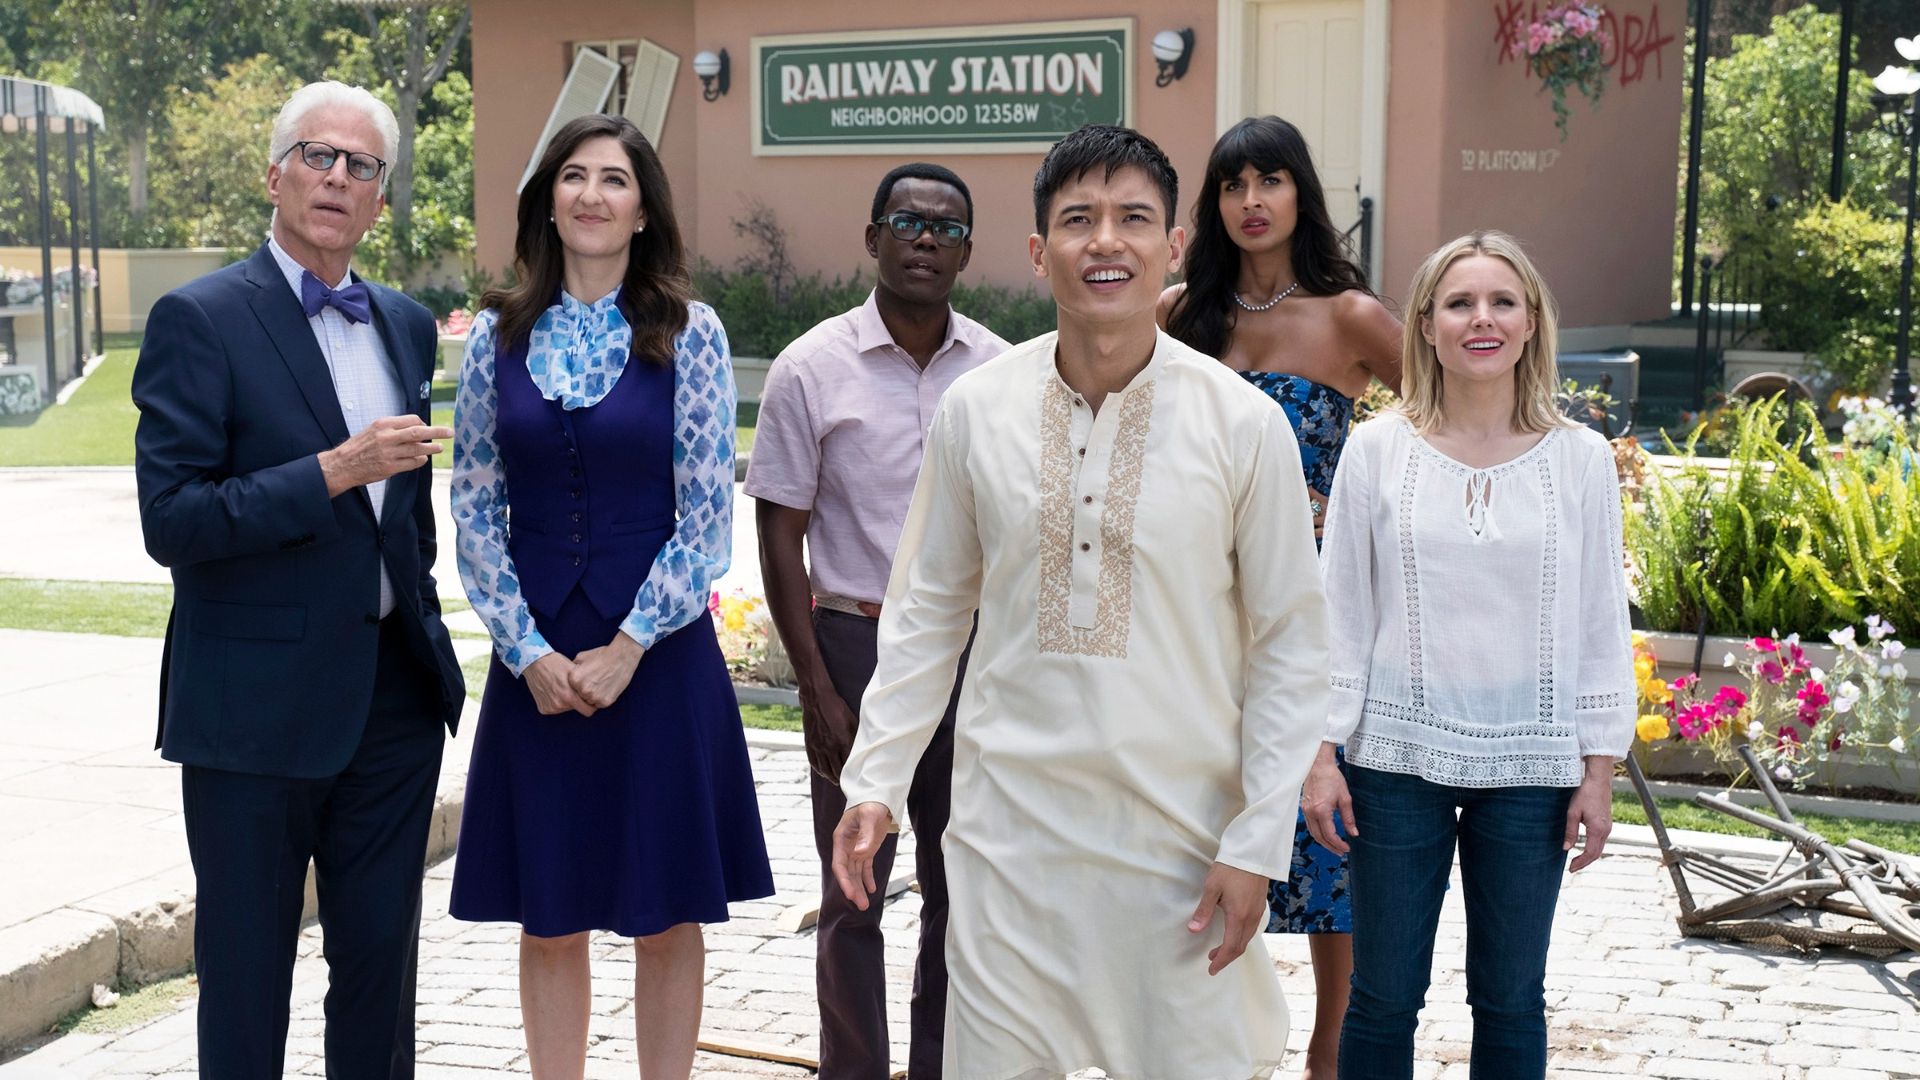 The Good Place – one of the best Netflix shows you can watch right now